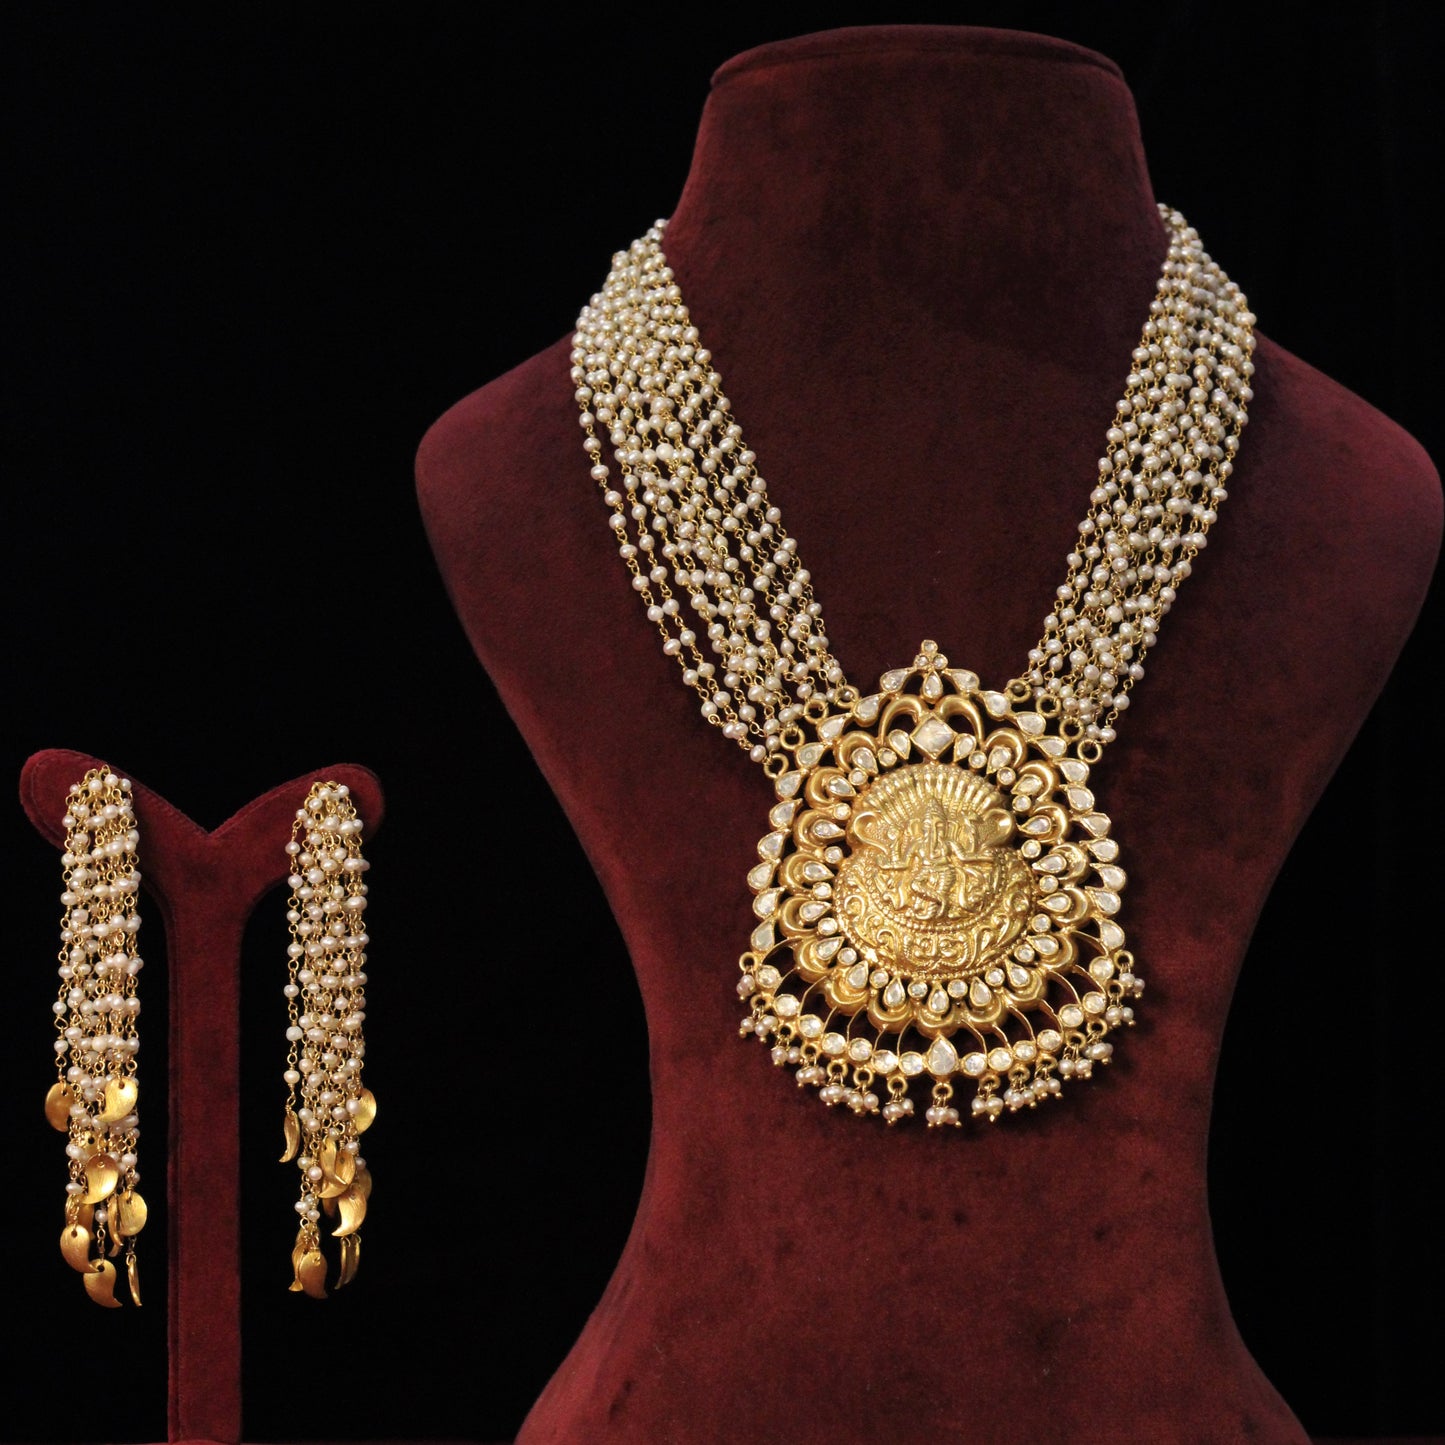 NECKLACE:-  92.5 STERLING SILVER, KUNDAN WITH FRESH WATER PEARLS  & 18K GOLD PLATED